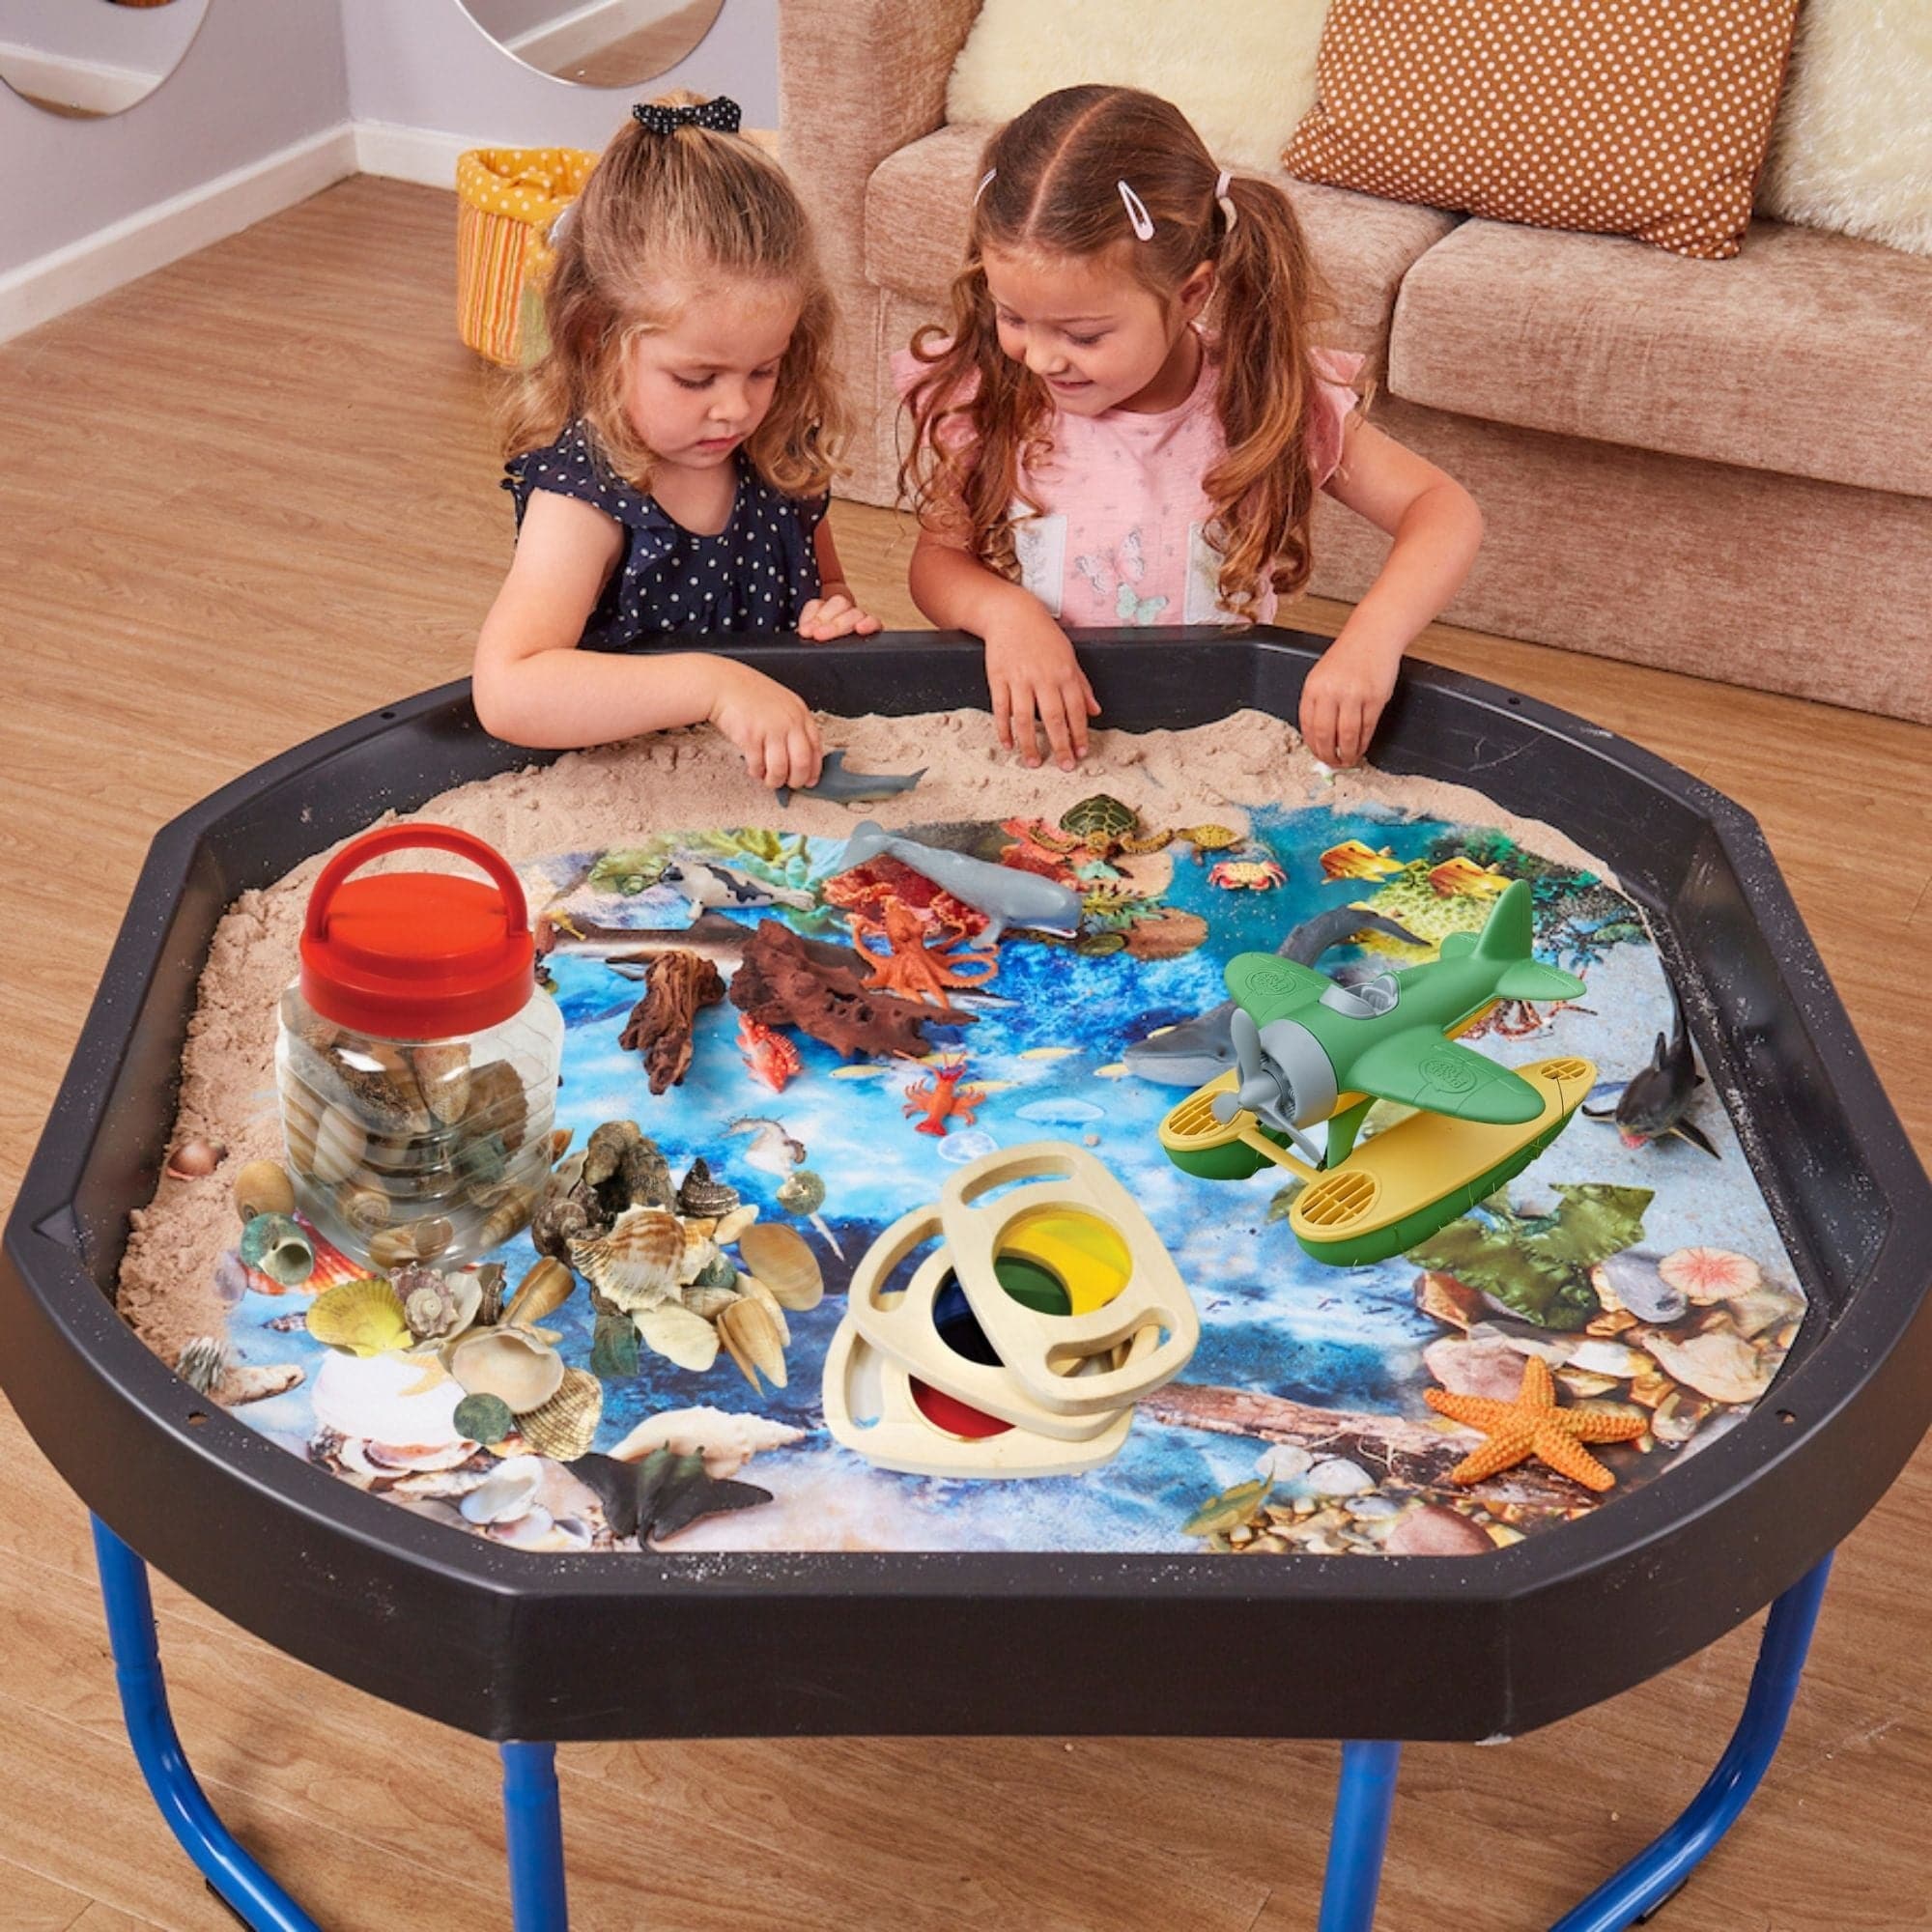 Tuff Tray Play Set Under the Sea, Introduce your young learners to the wonders of marine life with the Under The Sea Tuff Tray Accessory Kit. Unlike other sets, this comprehensive package includes not just the accessories but also the Tuff Tray and stand, making it a convenient 'one-stop-shop' for educational play. Tuff Tray Play Set Under the Sea Features: 🌊 Under the Sea Tuff Tray Mat: This thematic mat provides a vibrant backdrop for imaginative play and storytelling, fully immersing children in the ocea